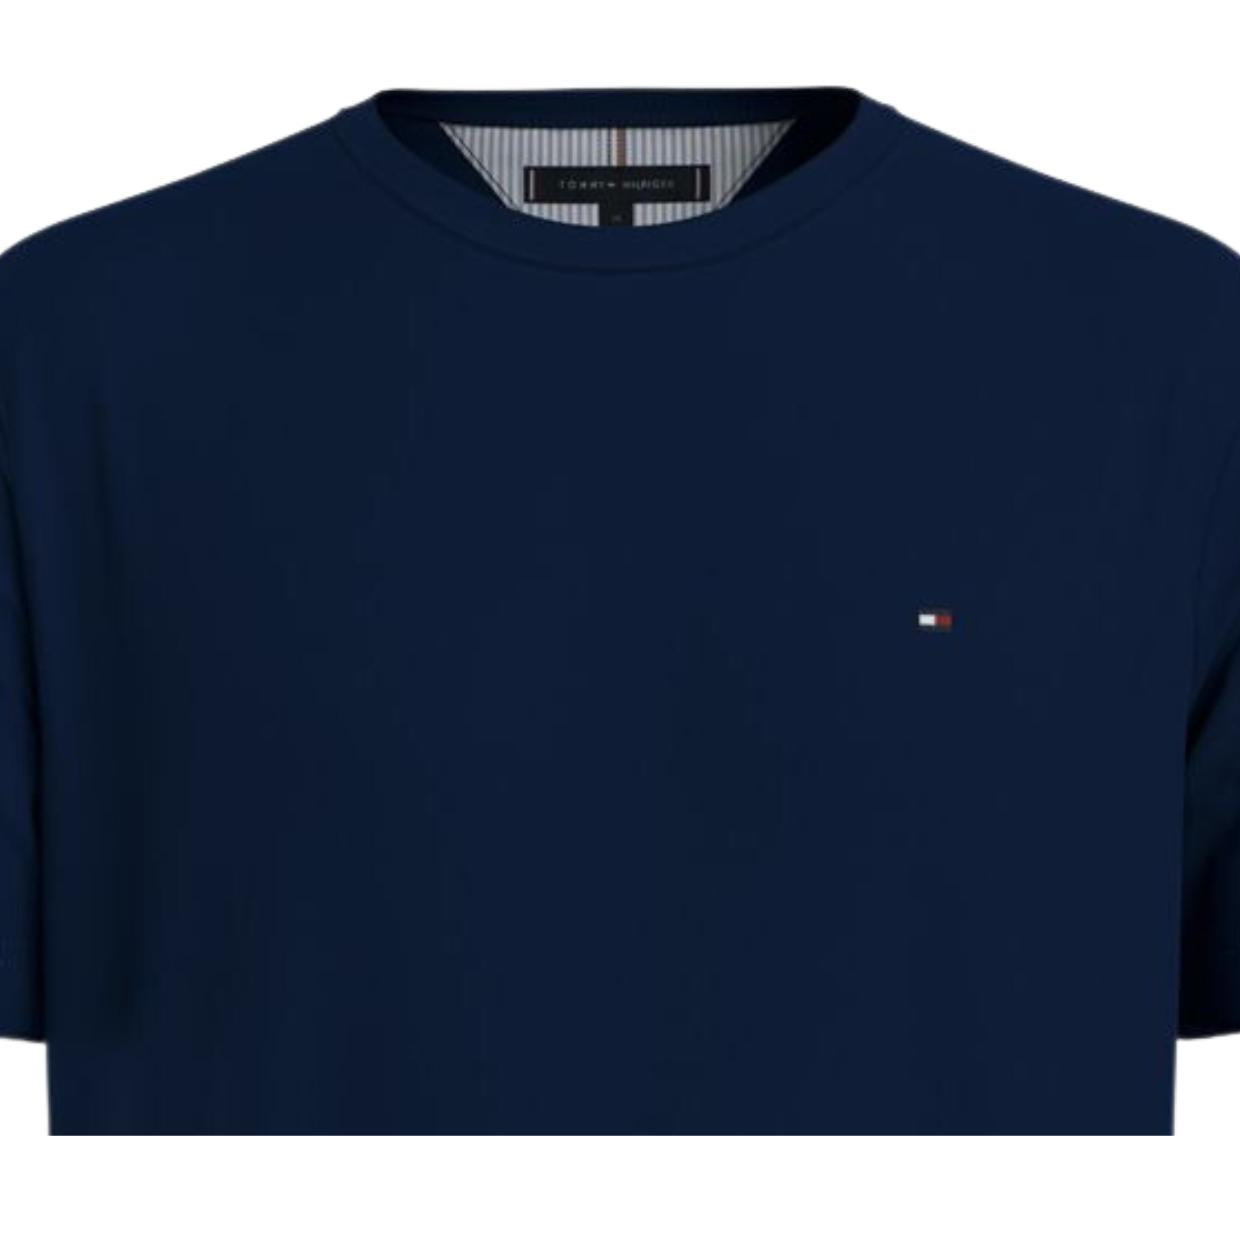 Tommy Hilfiger Embroidered Logo 1955 Navy T-Shirt